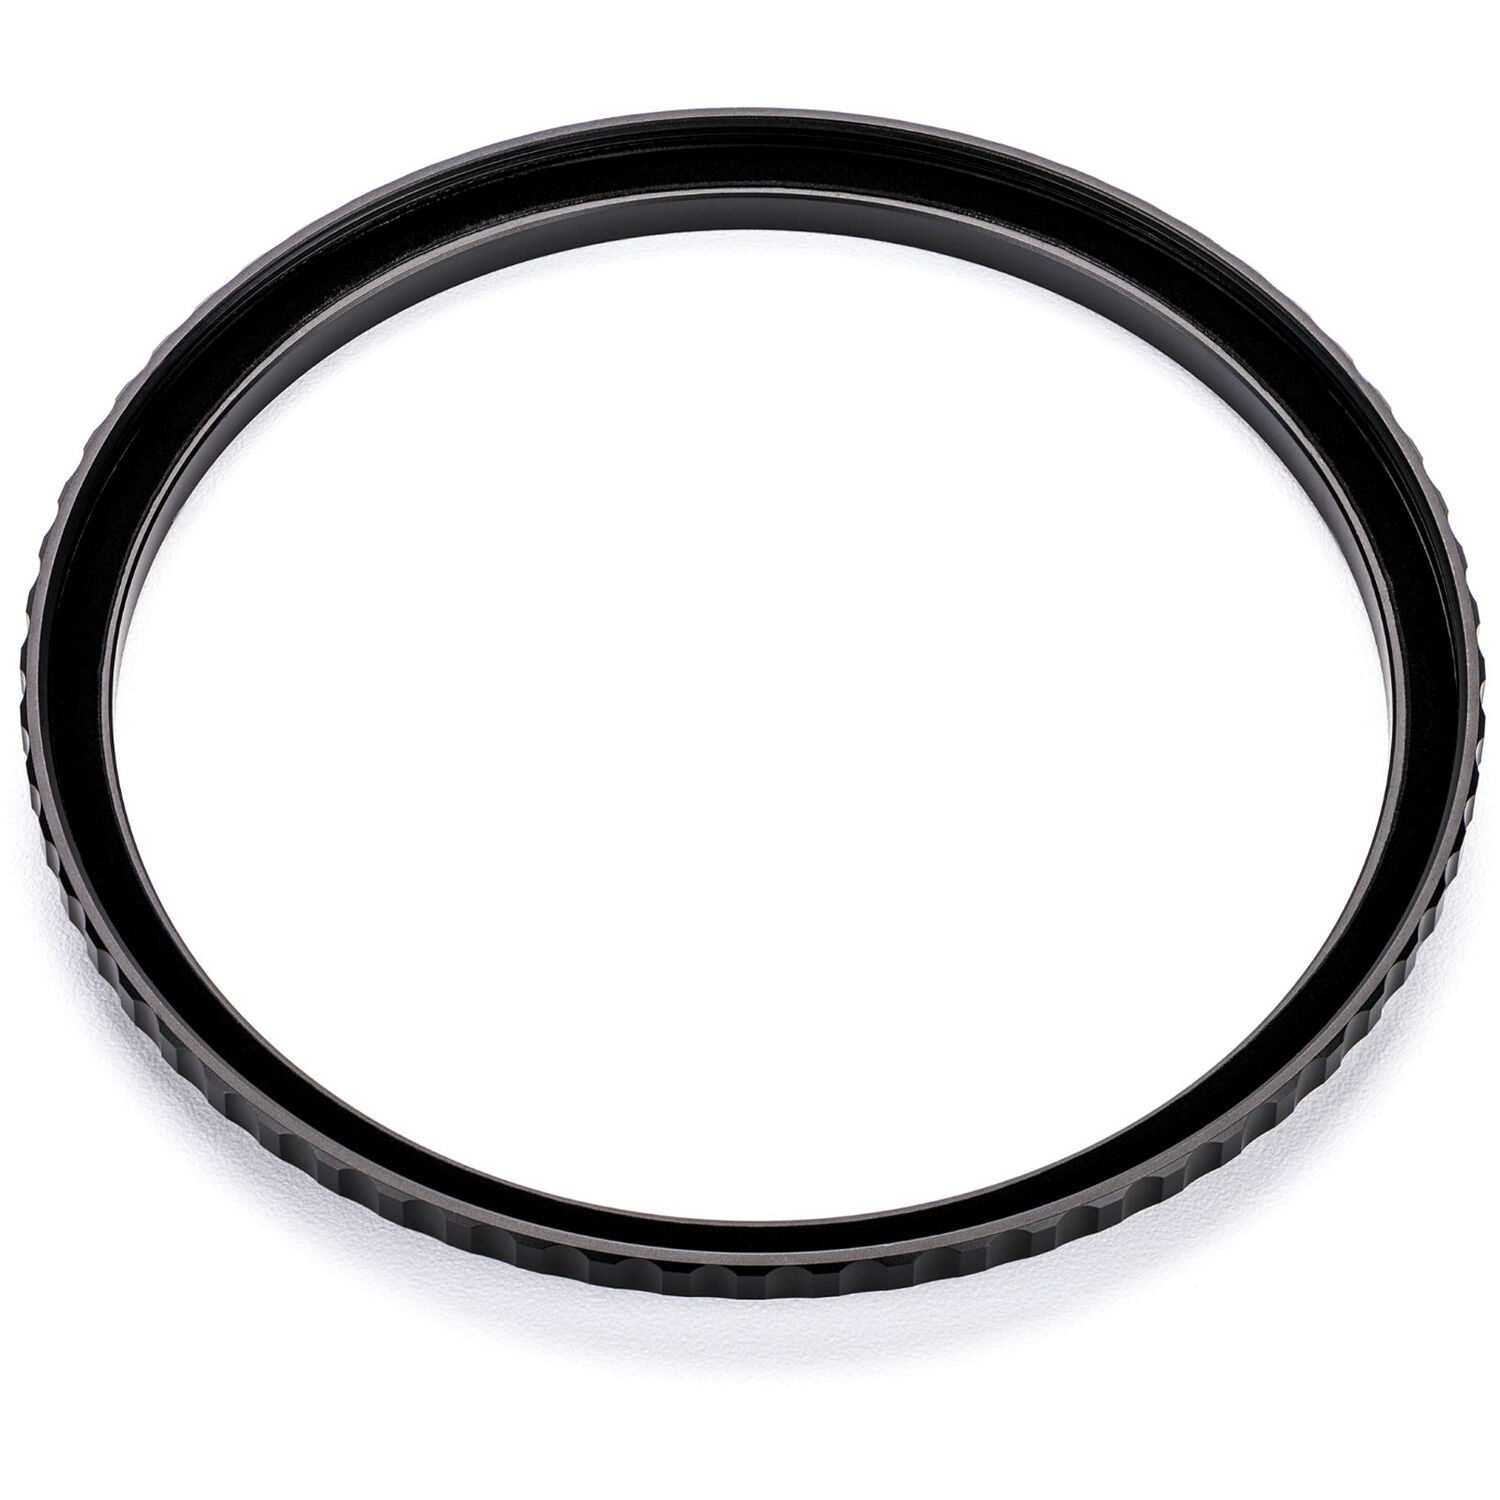 NiSi Brass Pro 46-52mm Step-Up Ring